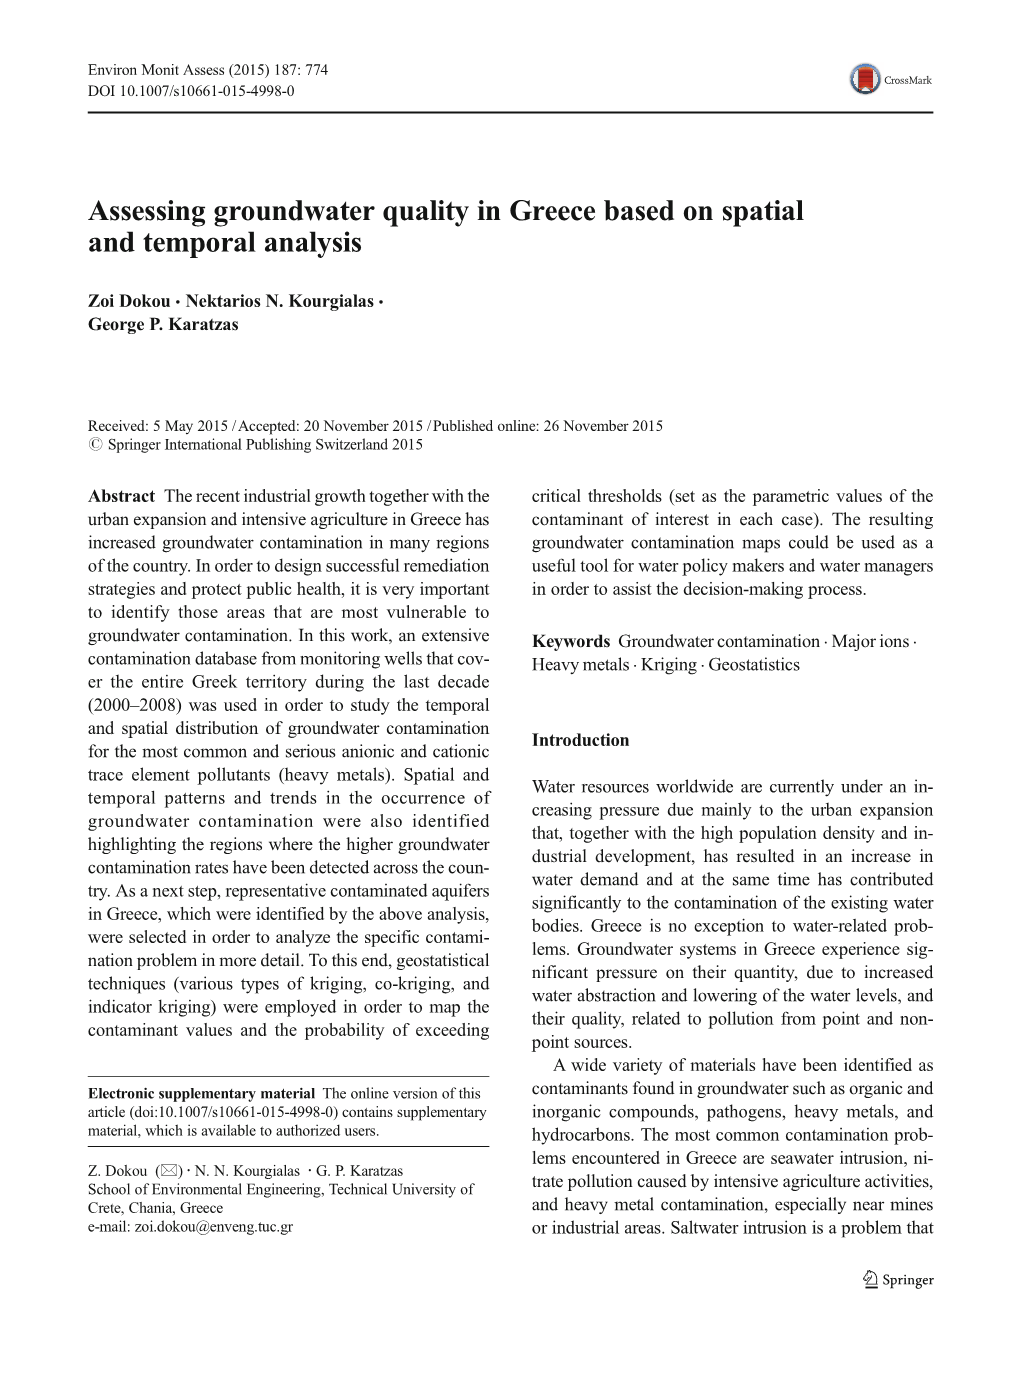 Assessing Groundwater Quality in Greece Based on Spatial and Temporal Analysis